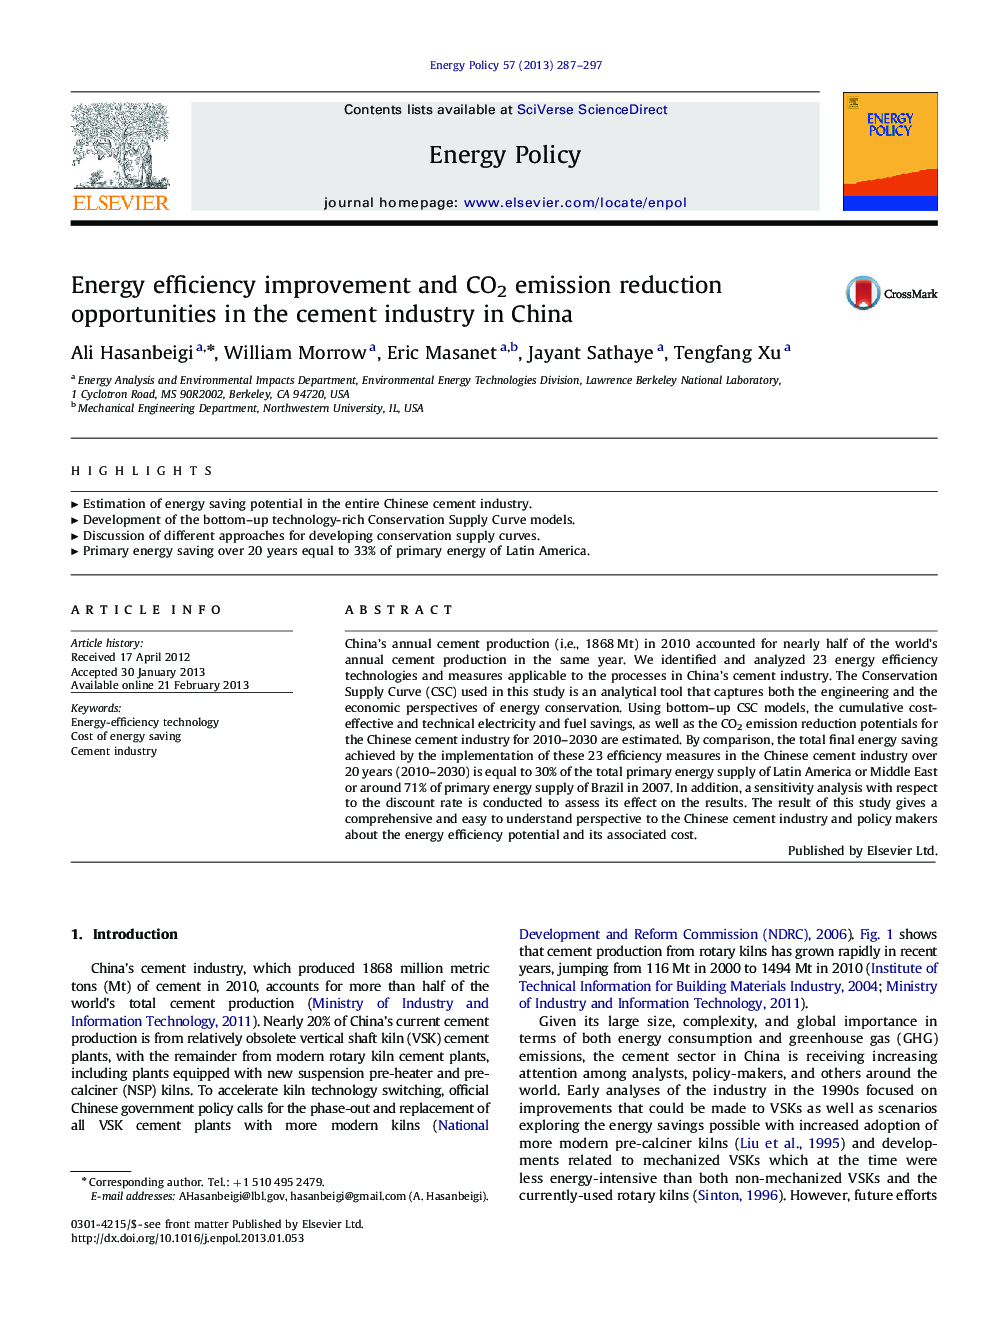 Energy efficiency improvement and CO2 emission reduction opportunities in the cement industry in China